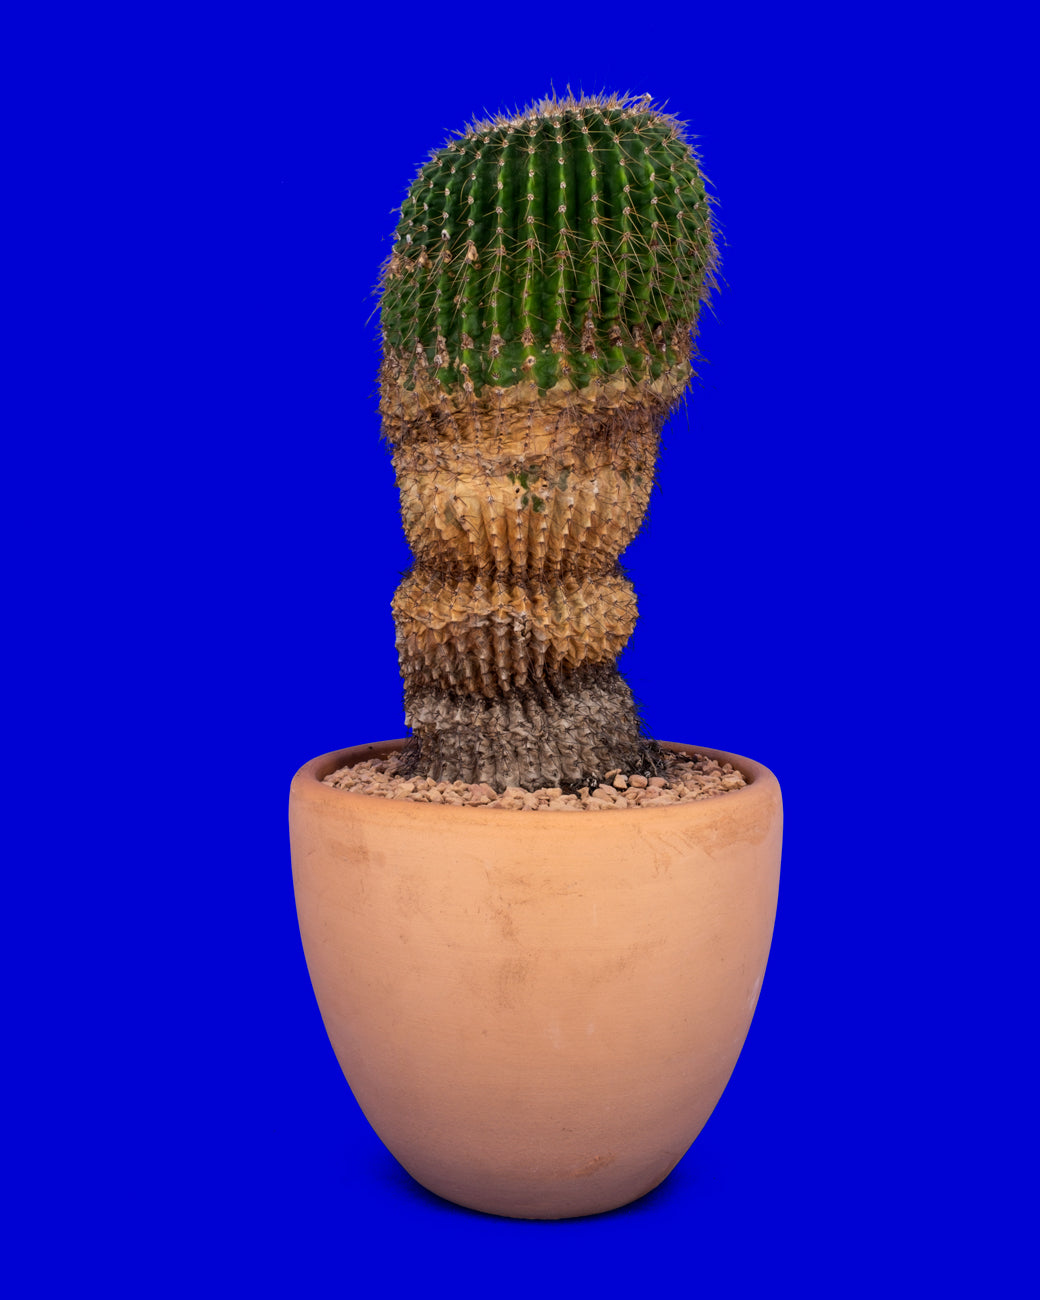 A mature Parodia leninghausii, or Yellow Tower Cactus, for sale at Tula Plants & Design.